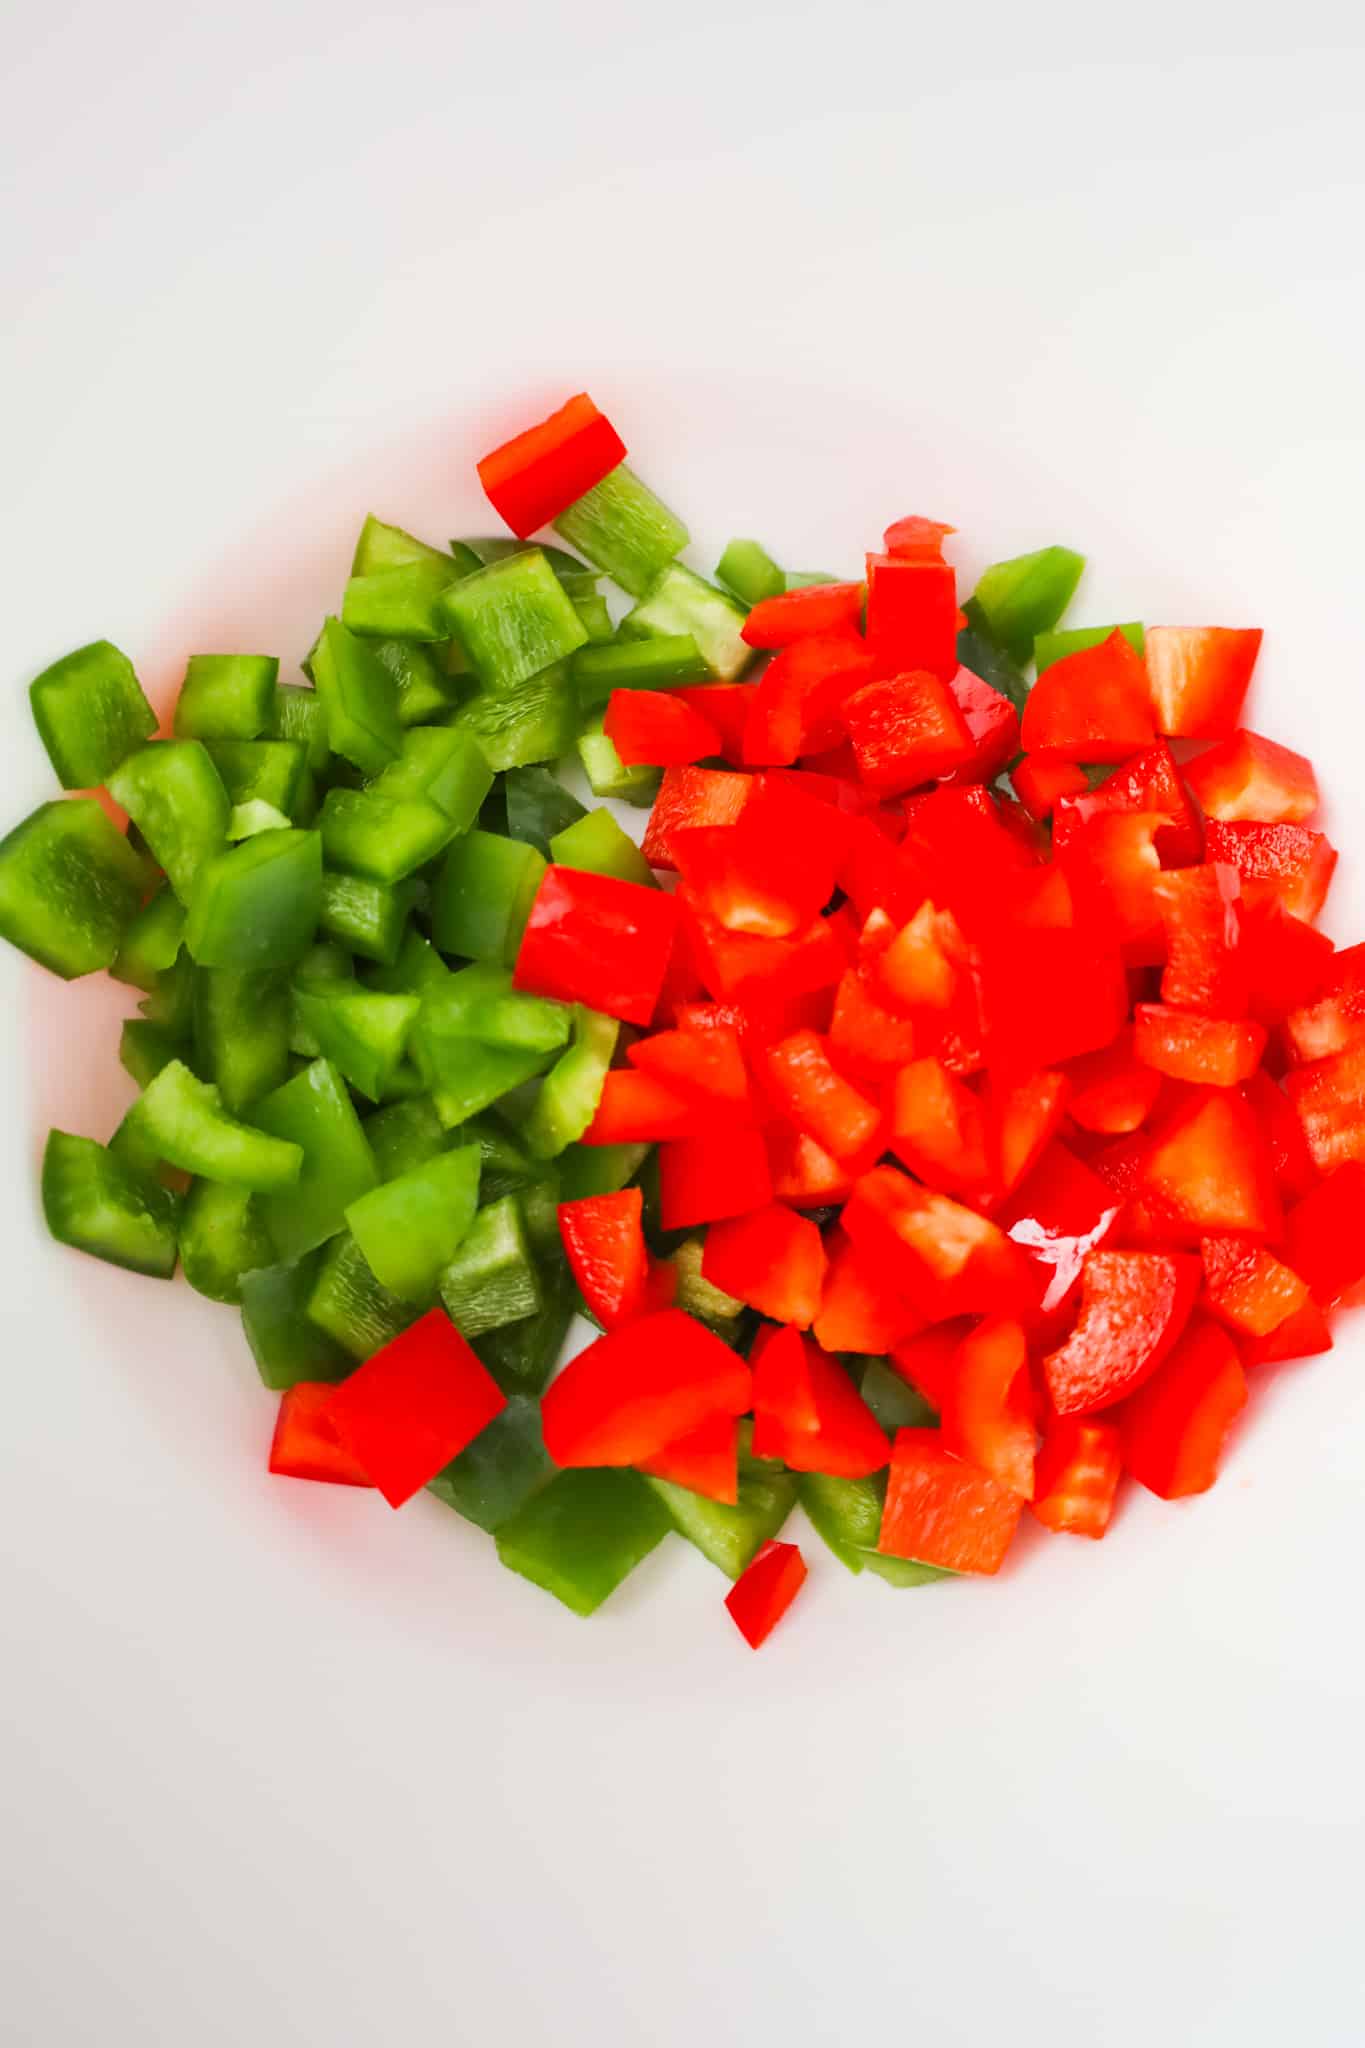 diced green peppers and red peppers in a mixing bowl